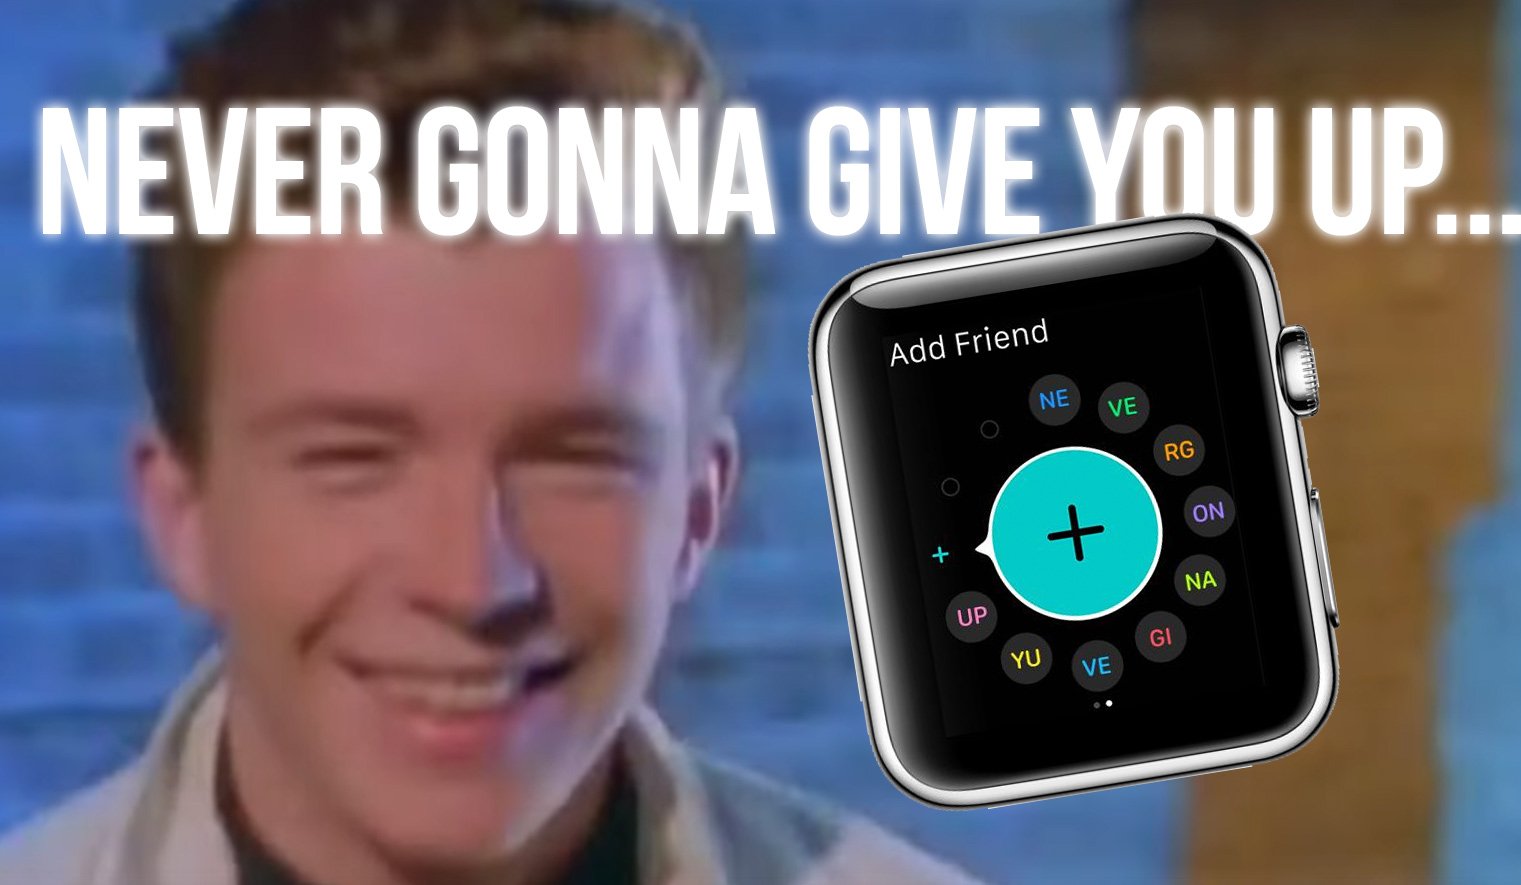 Apple mit Easter-Egg in Apple Watch: Rick Astley - Never gonna give you up! 1